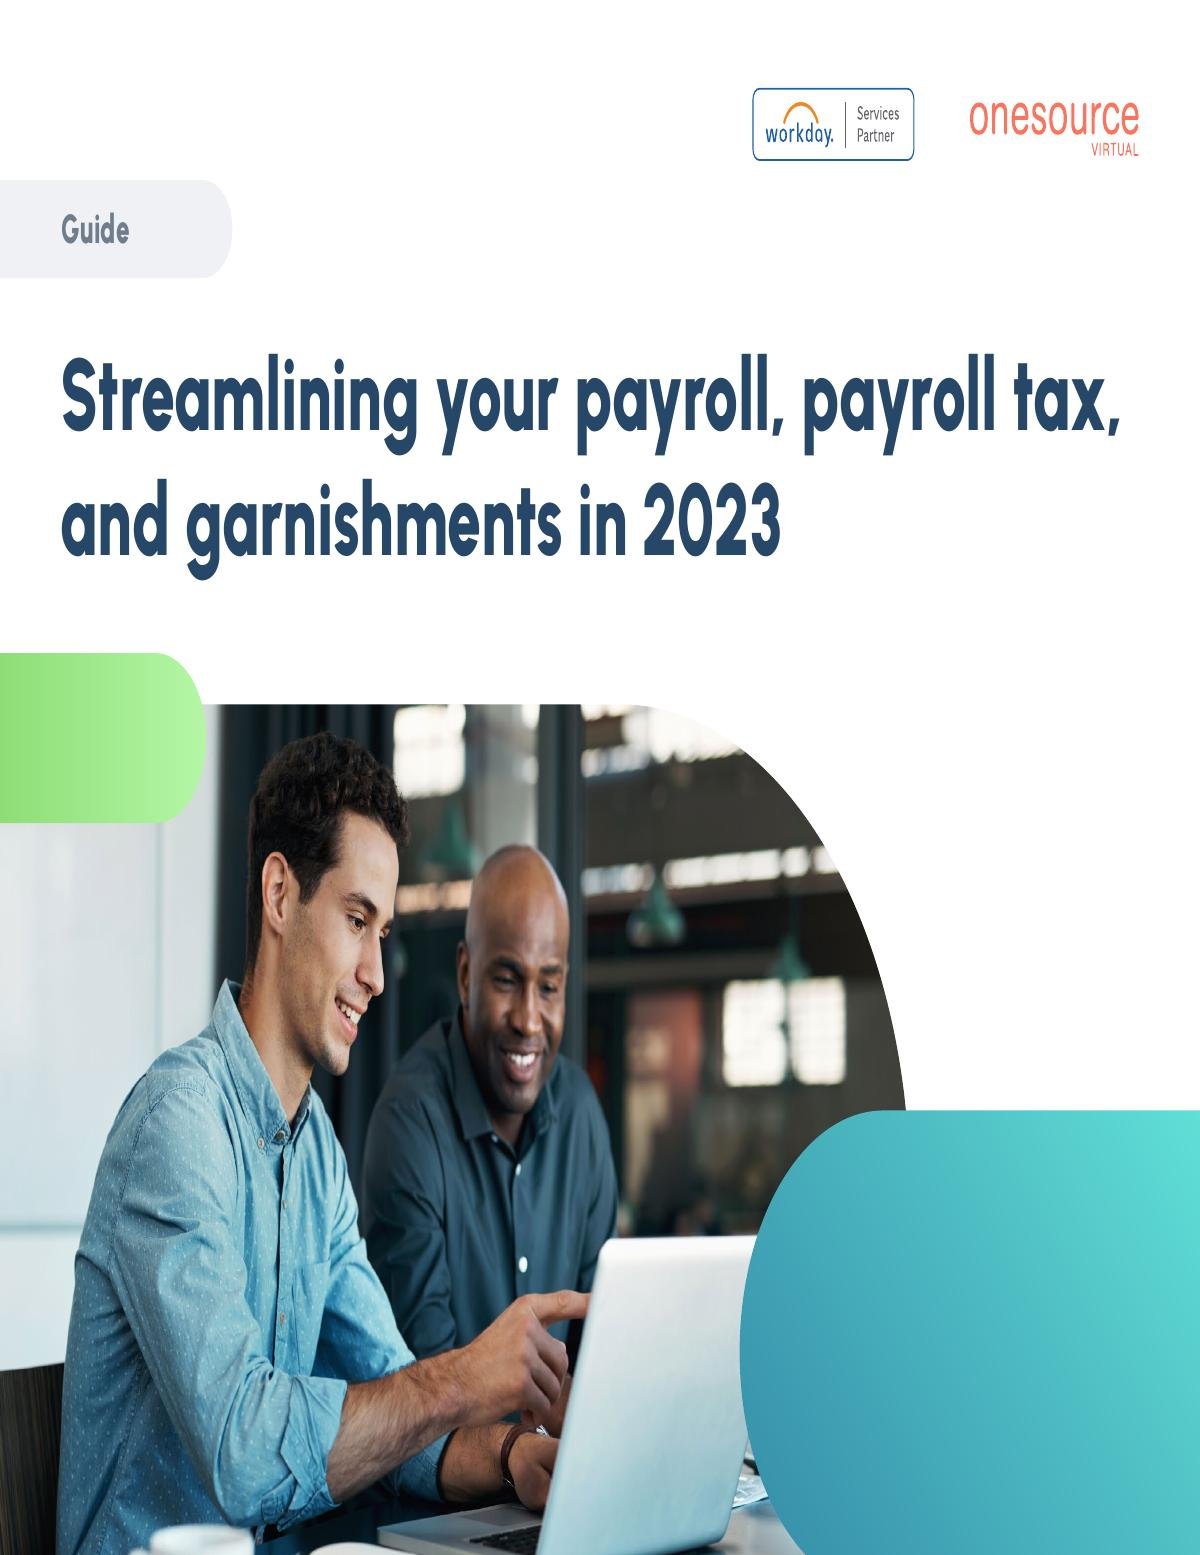 Streamlining your payroll, payroll tax, and garnishments in 2023 - Guide